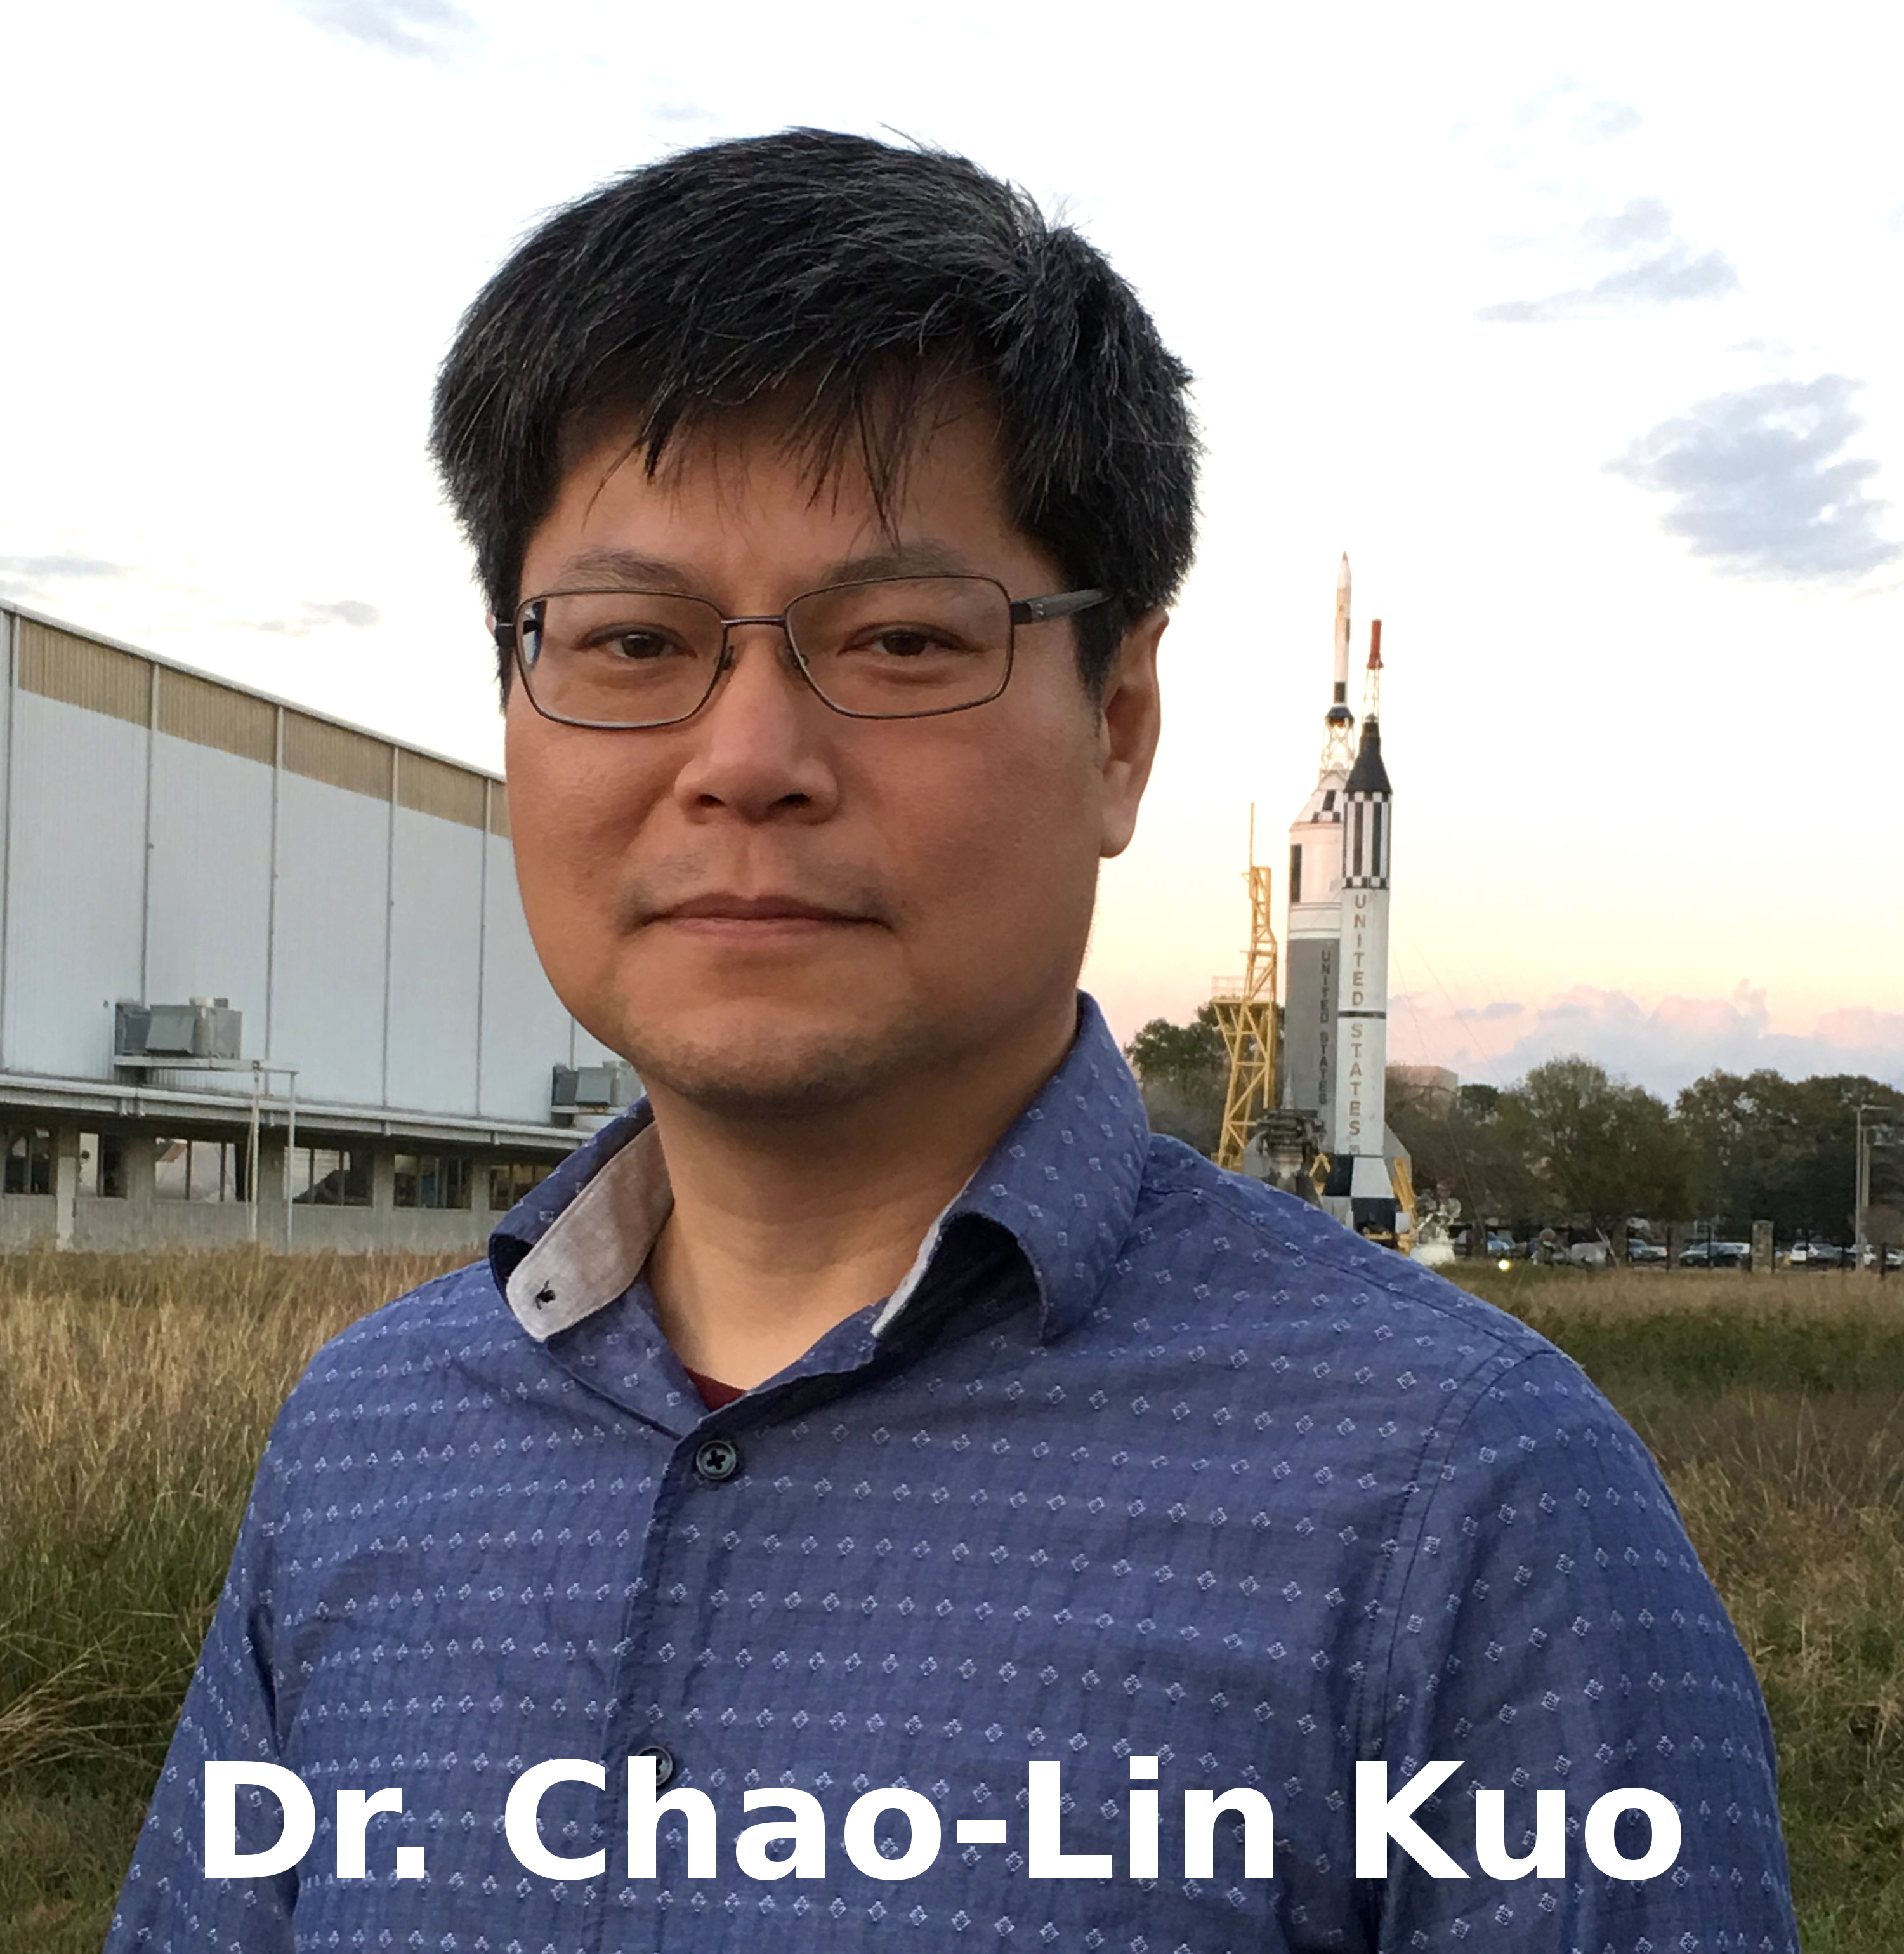 Dr. Chao-Lin Kuo